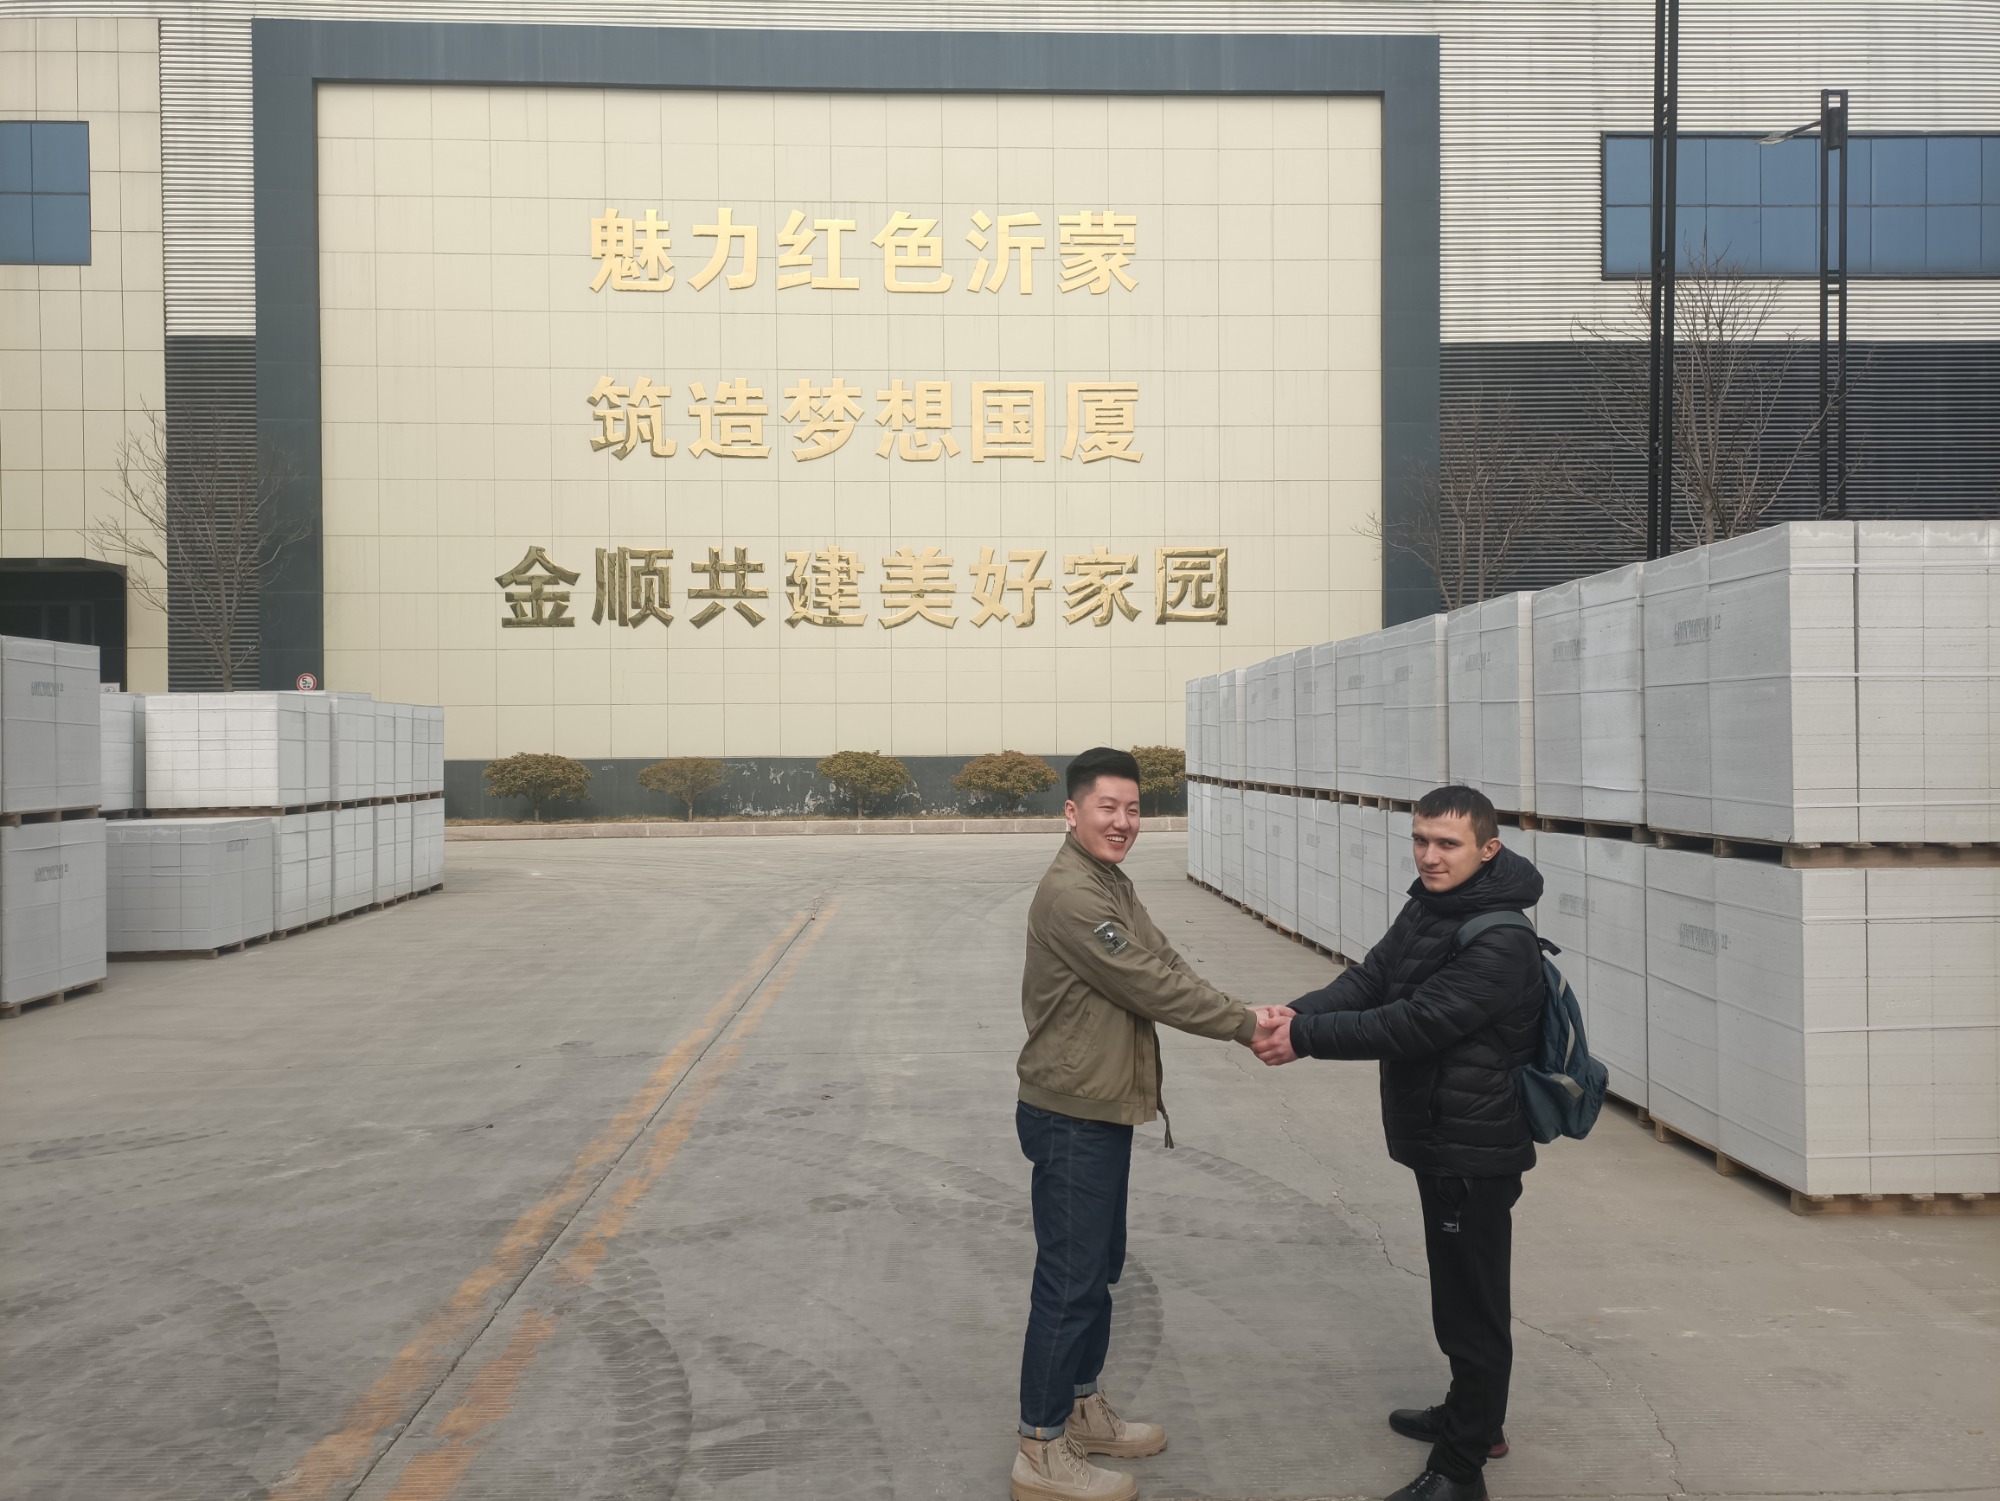 Promoting Shandong building materials to the world